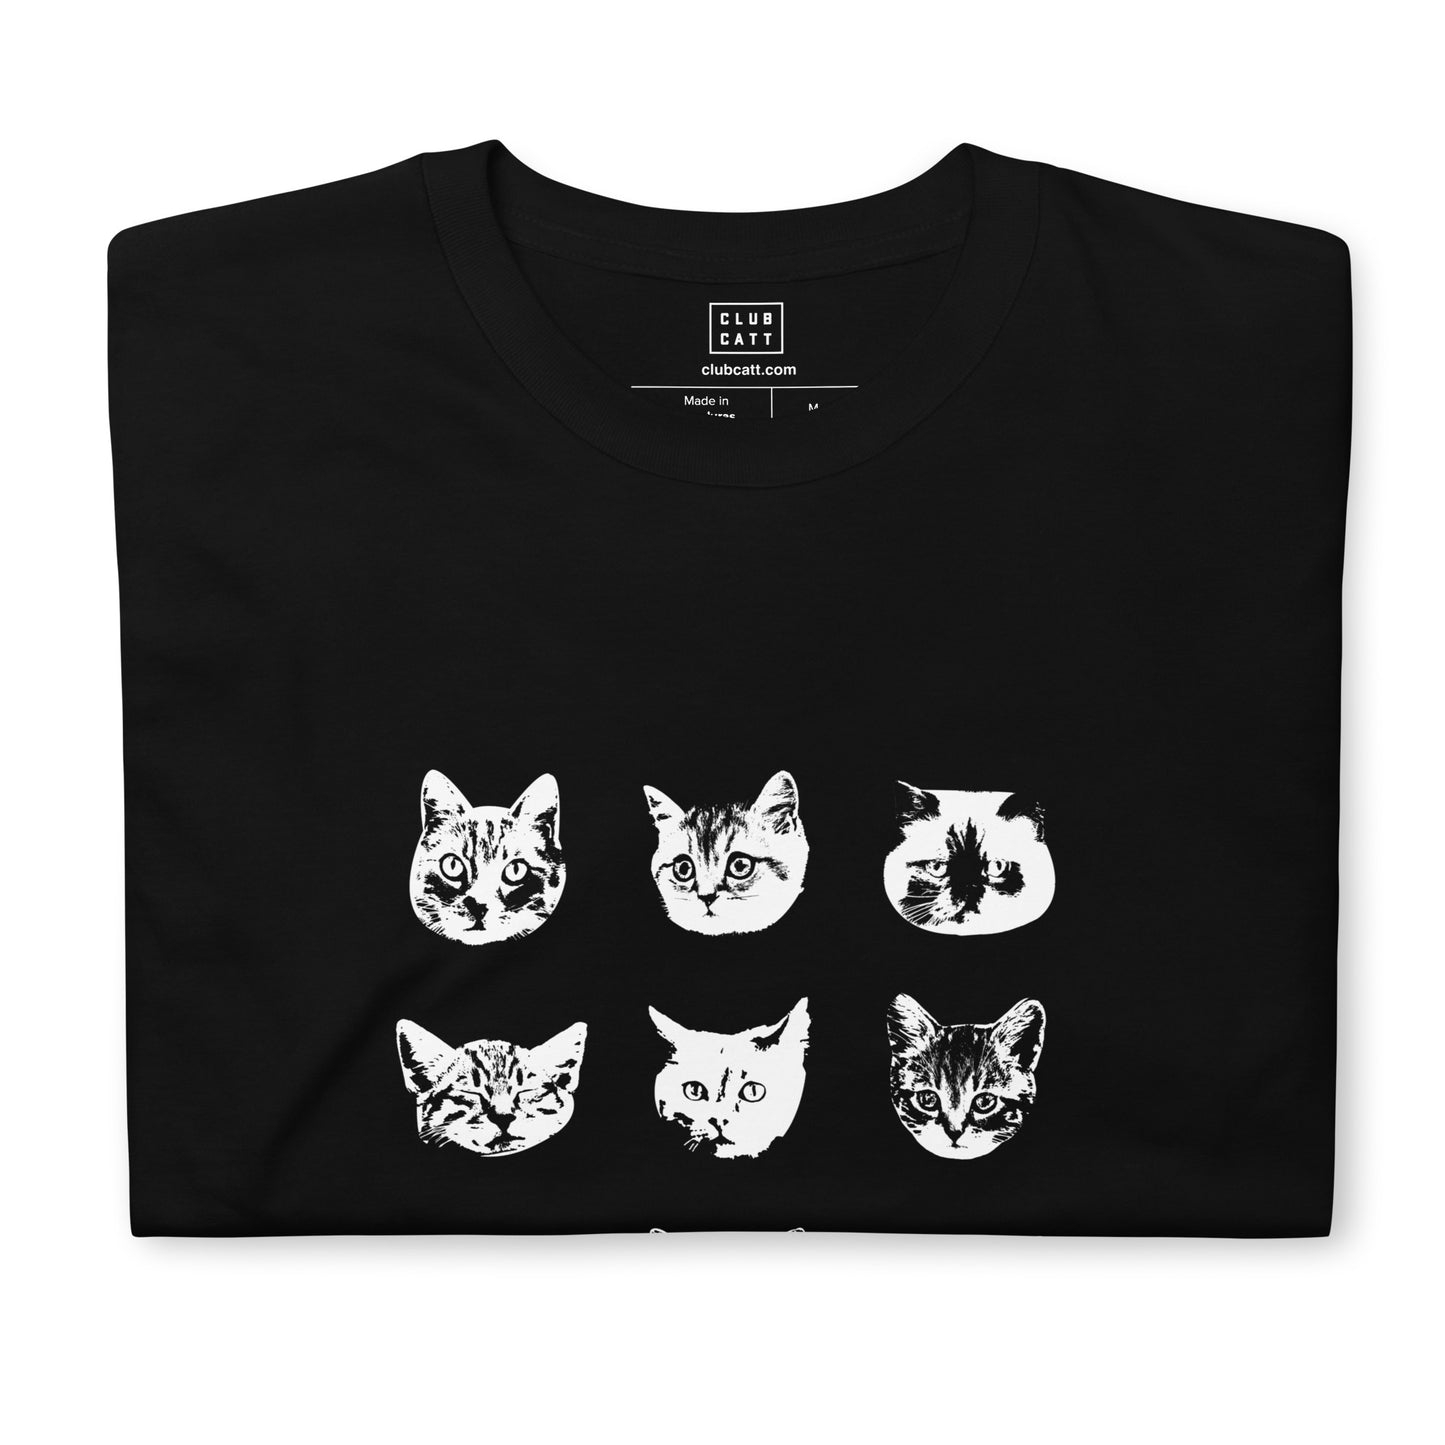 9 Cats on T-Shirt